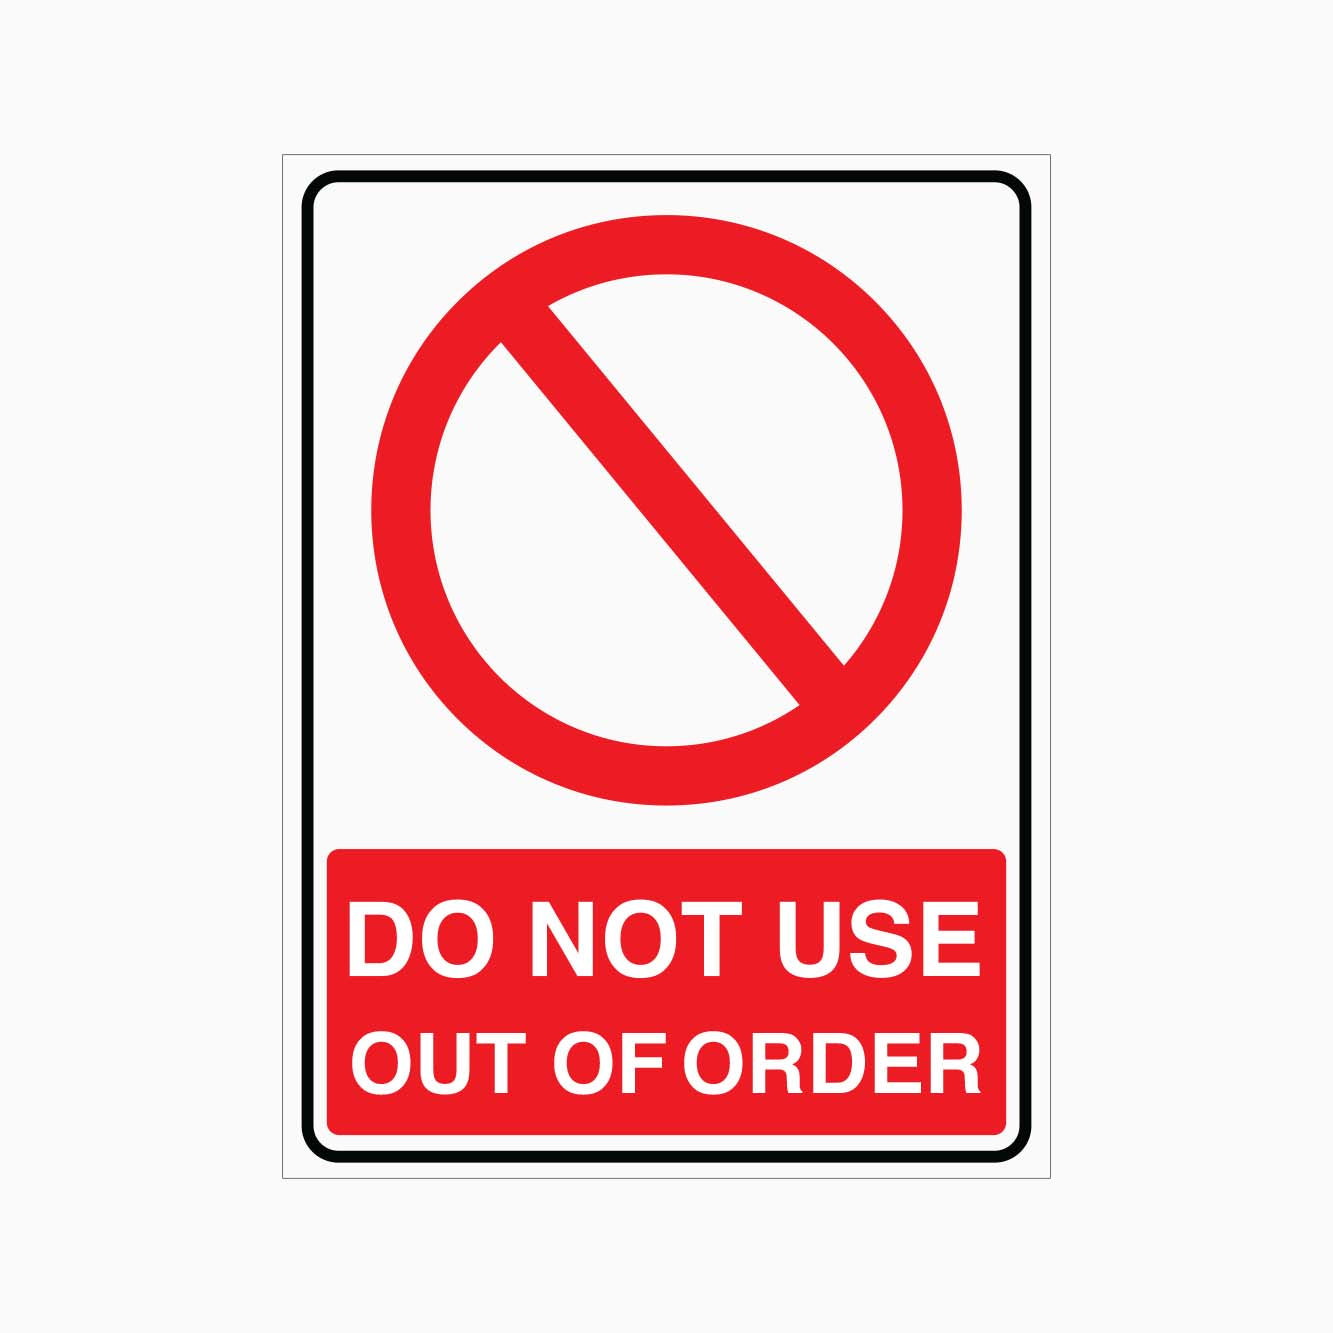 DO NOT USE OUT OF ORDER SIGN - GET SIGNS 